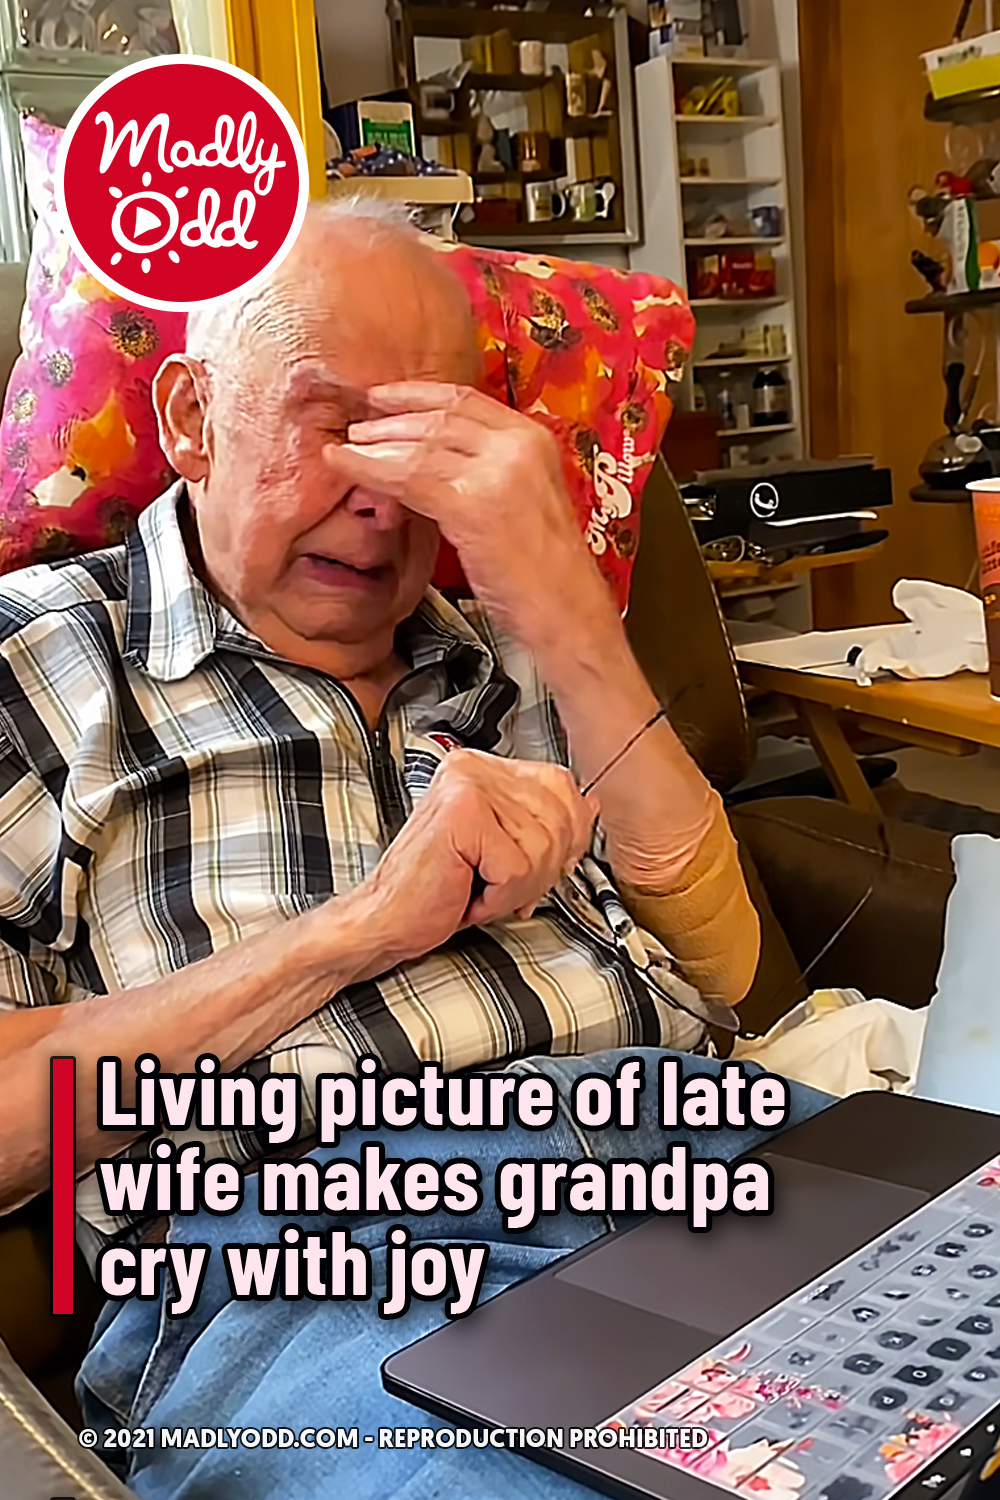 Living picture of late wife makes grandpa cry with joy